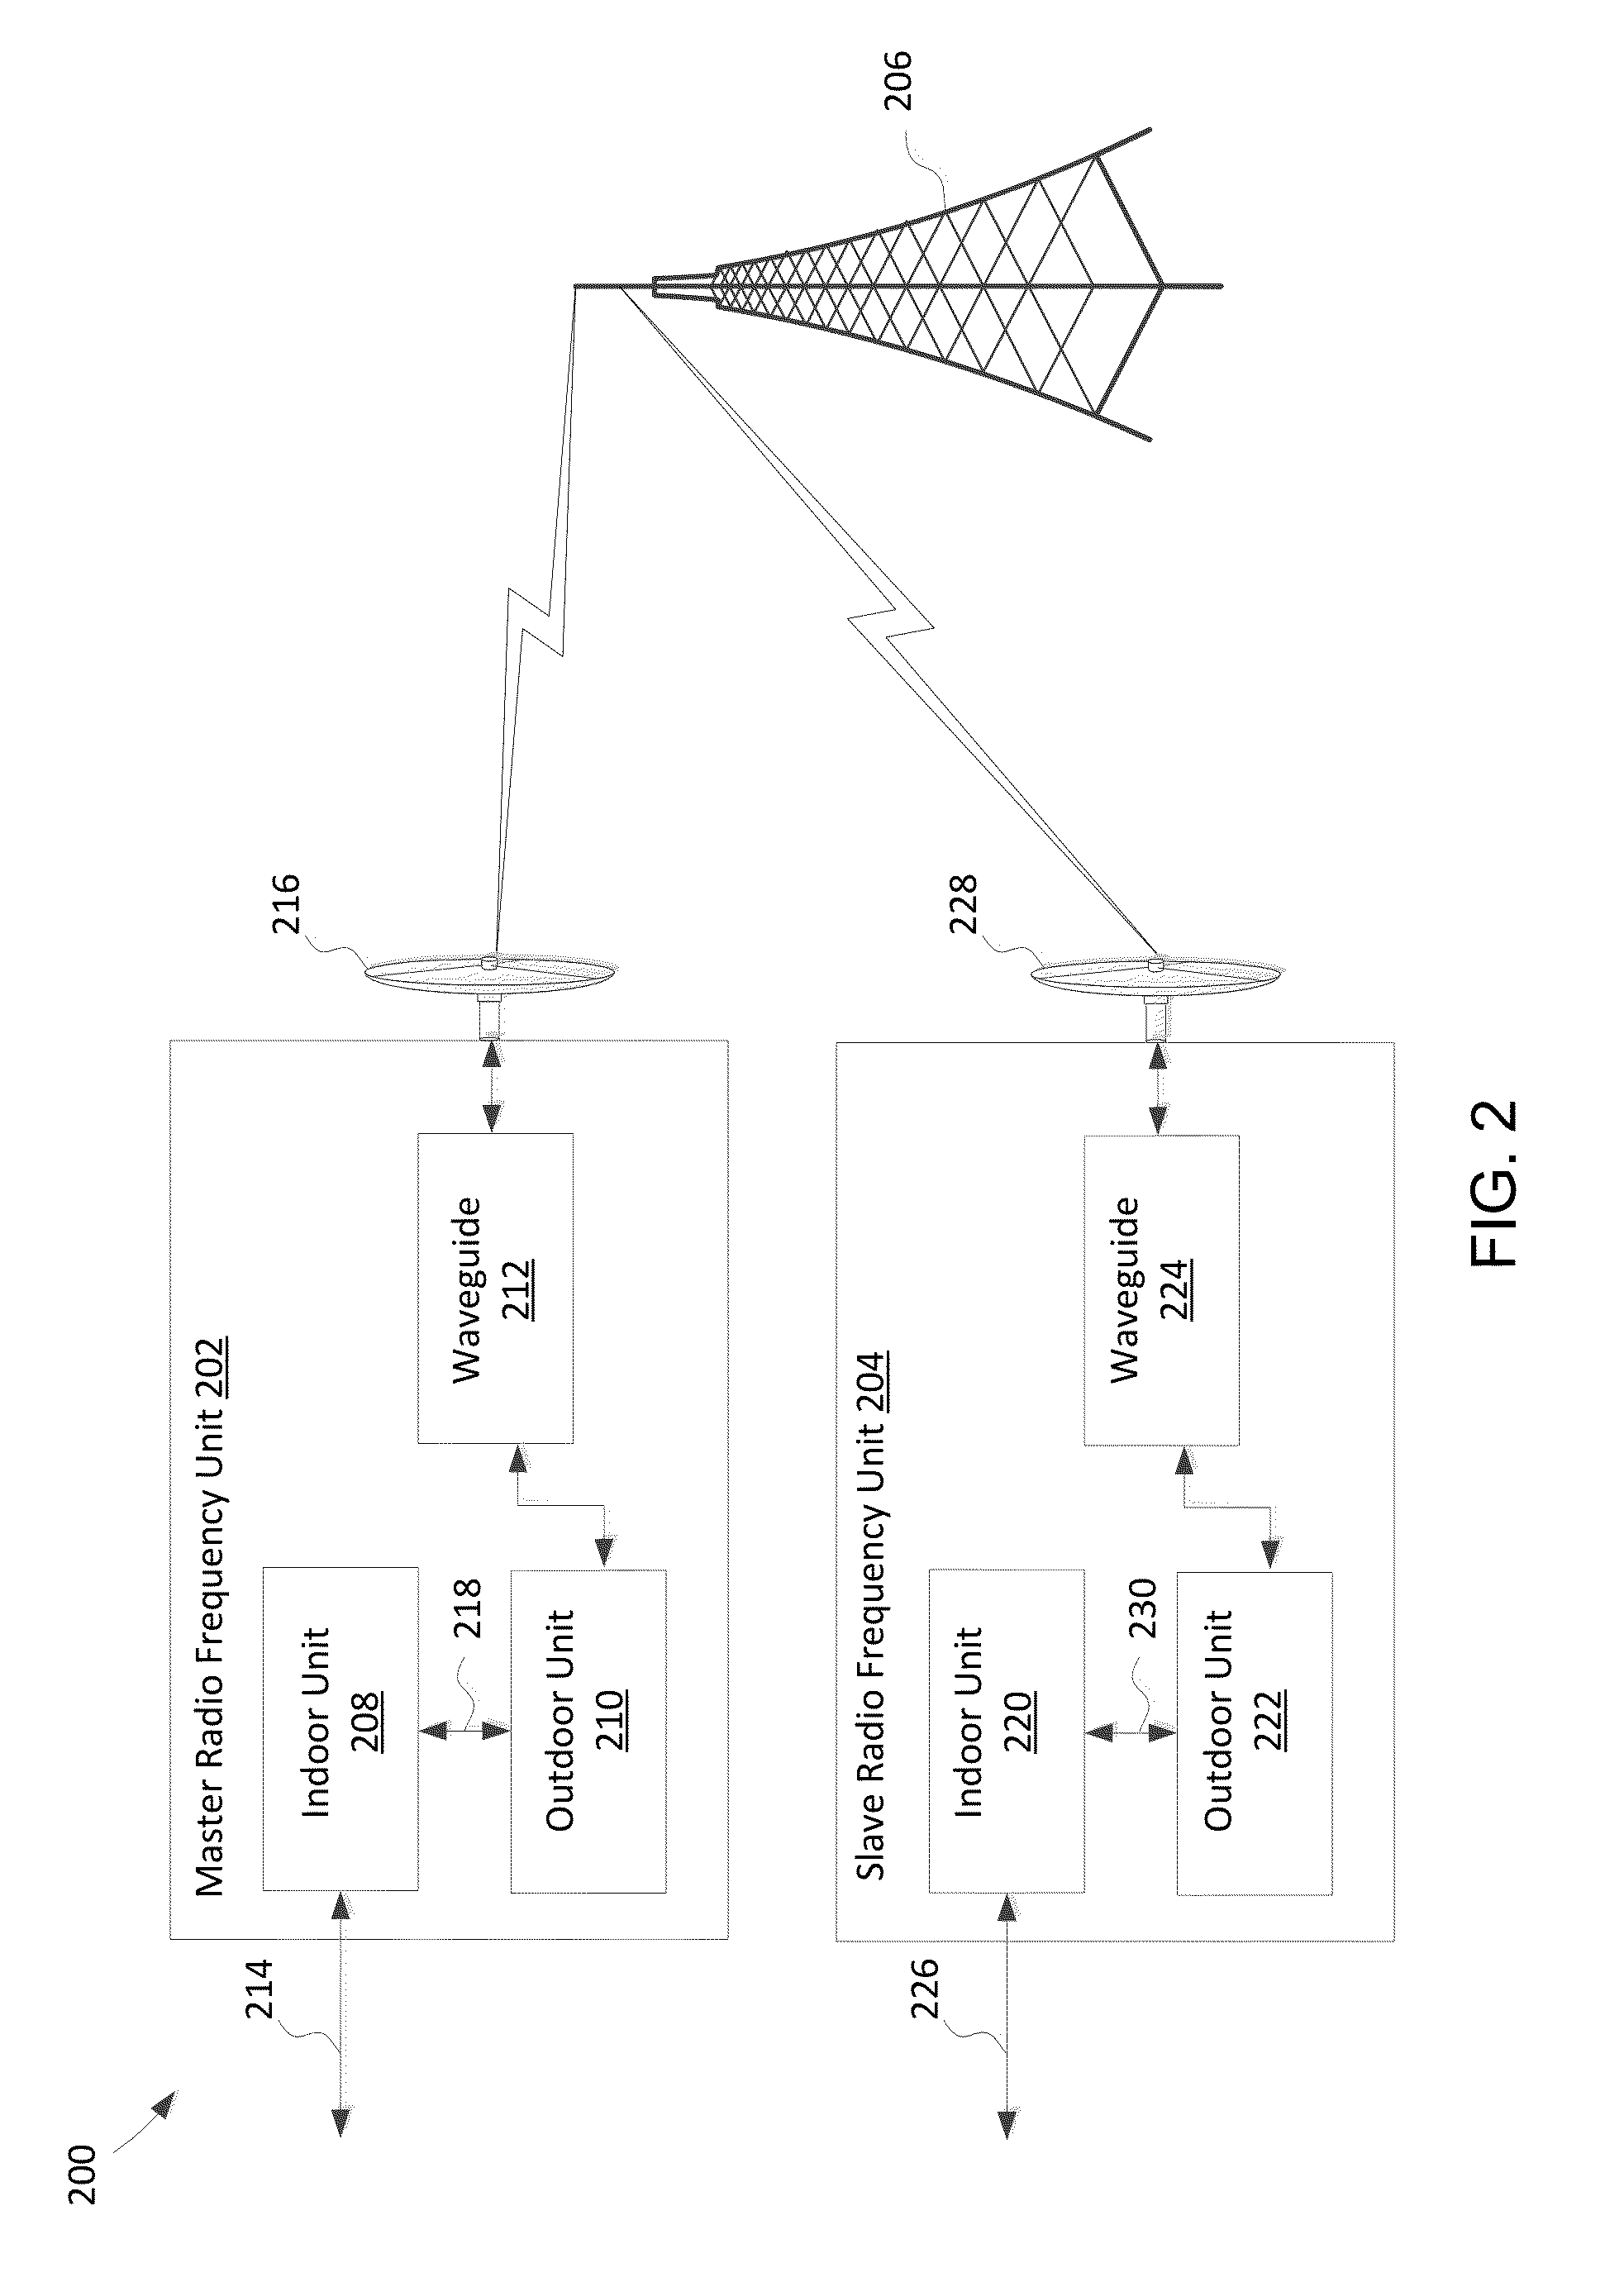 Systems and Methods of Network Synchronization